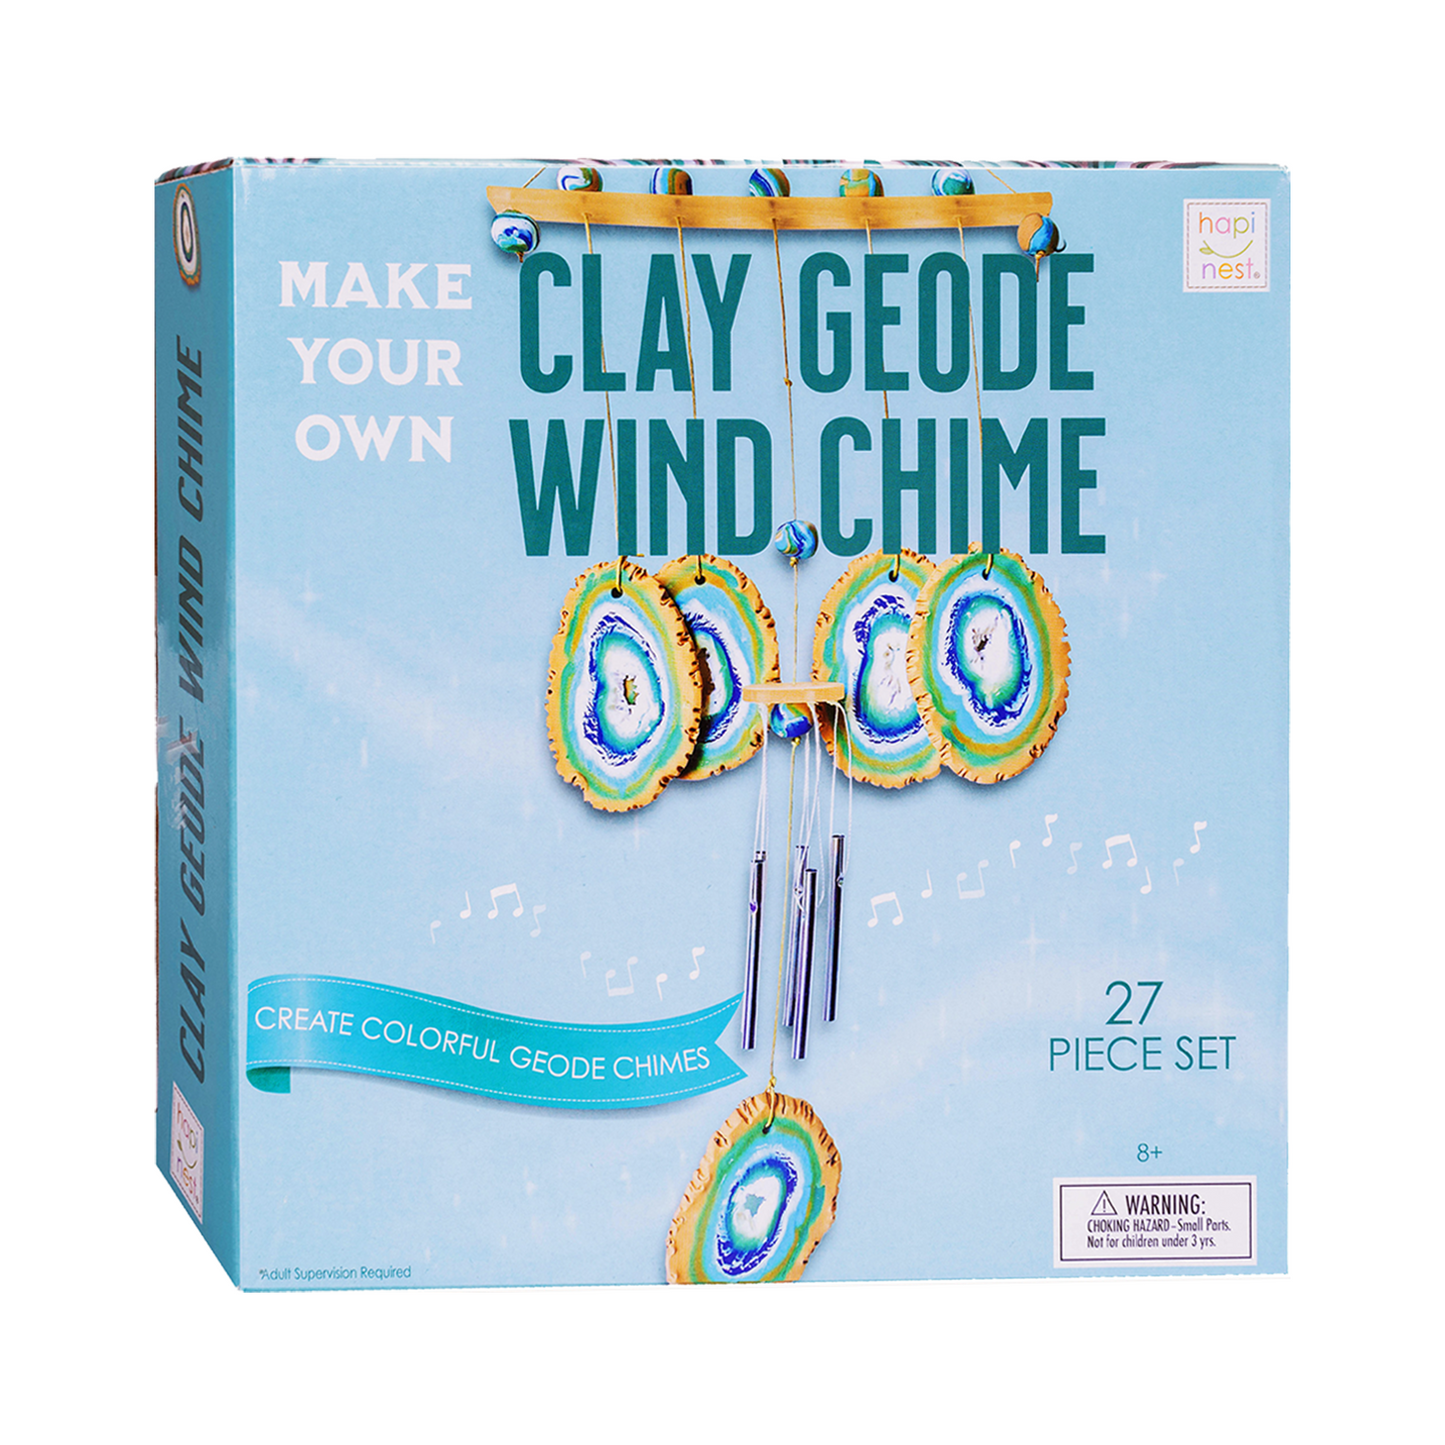 DIY Clay Geode Wind Chime - Craft Kit